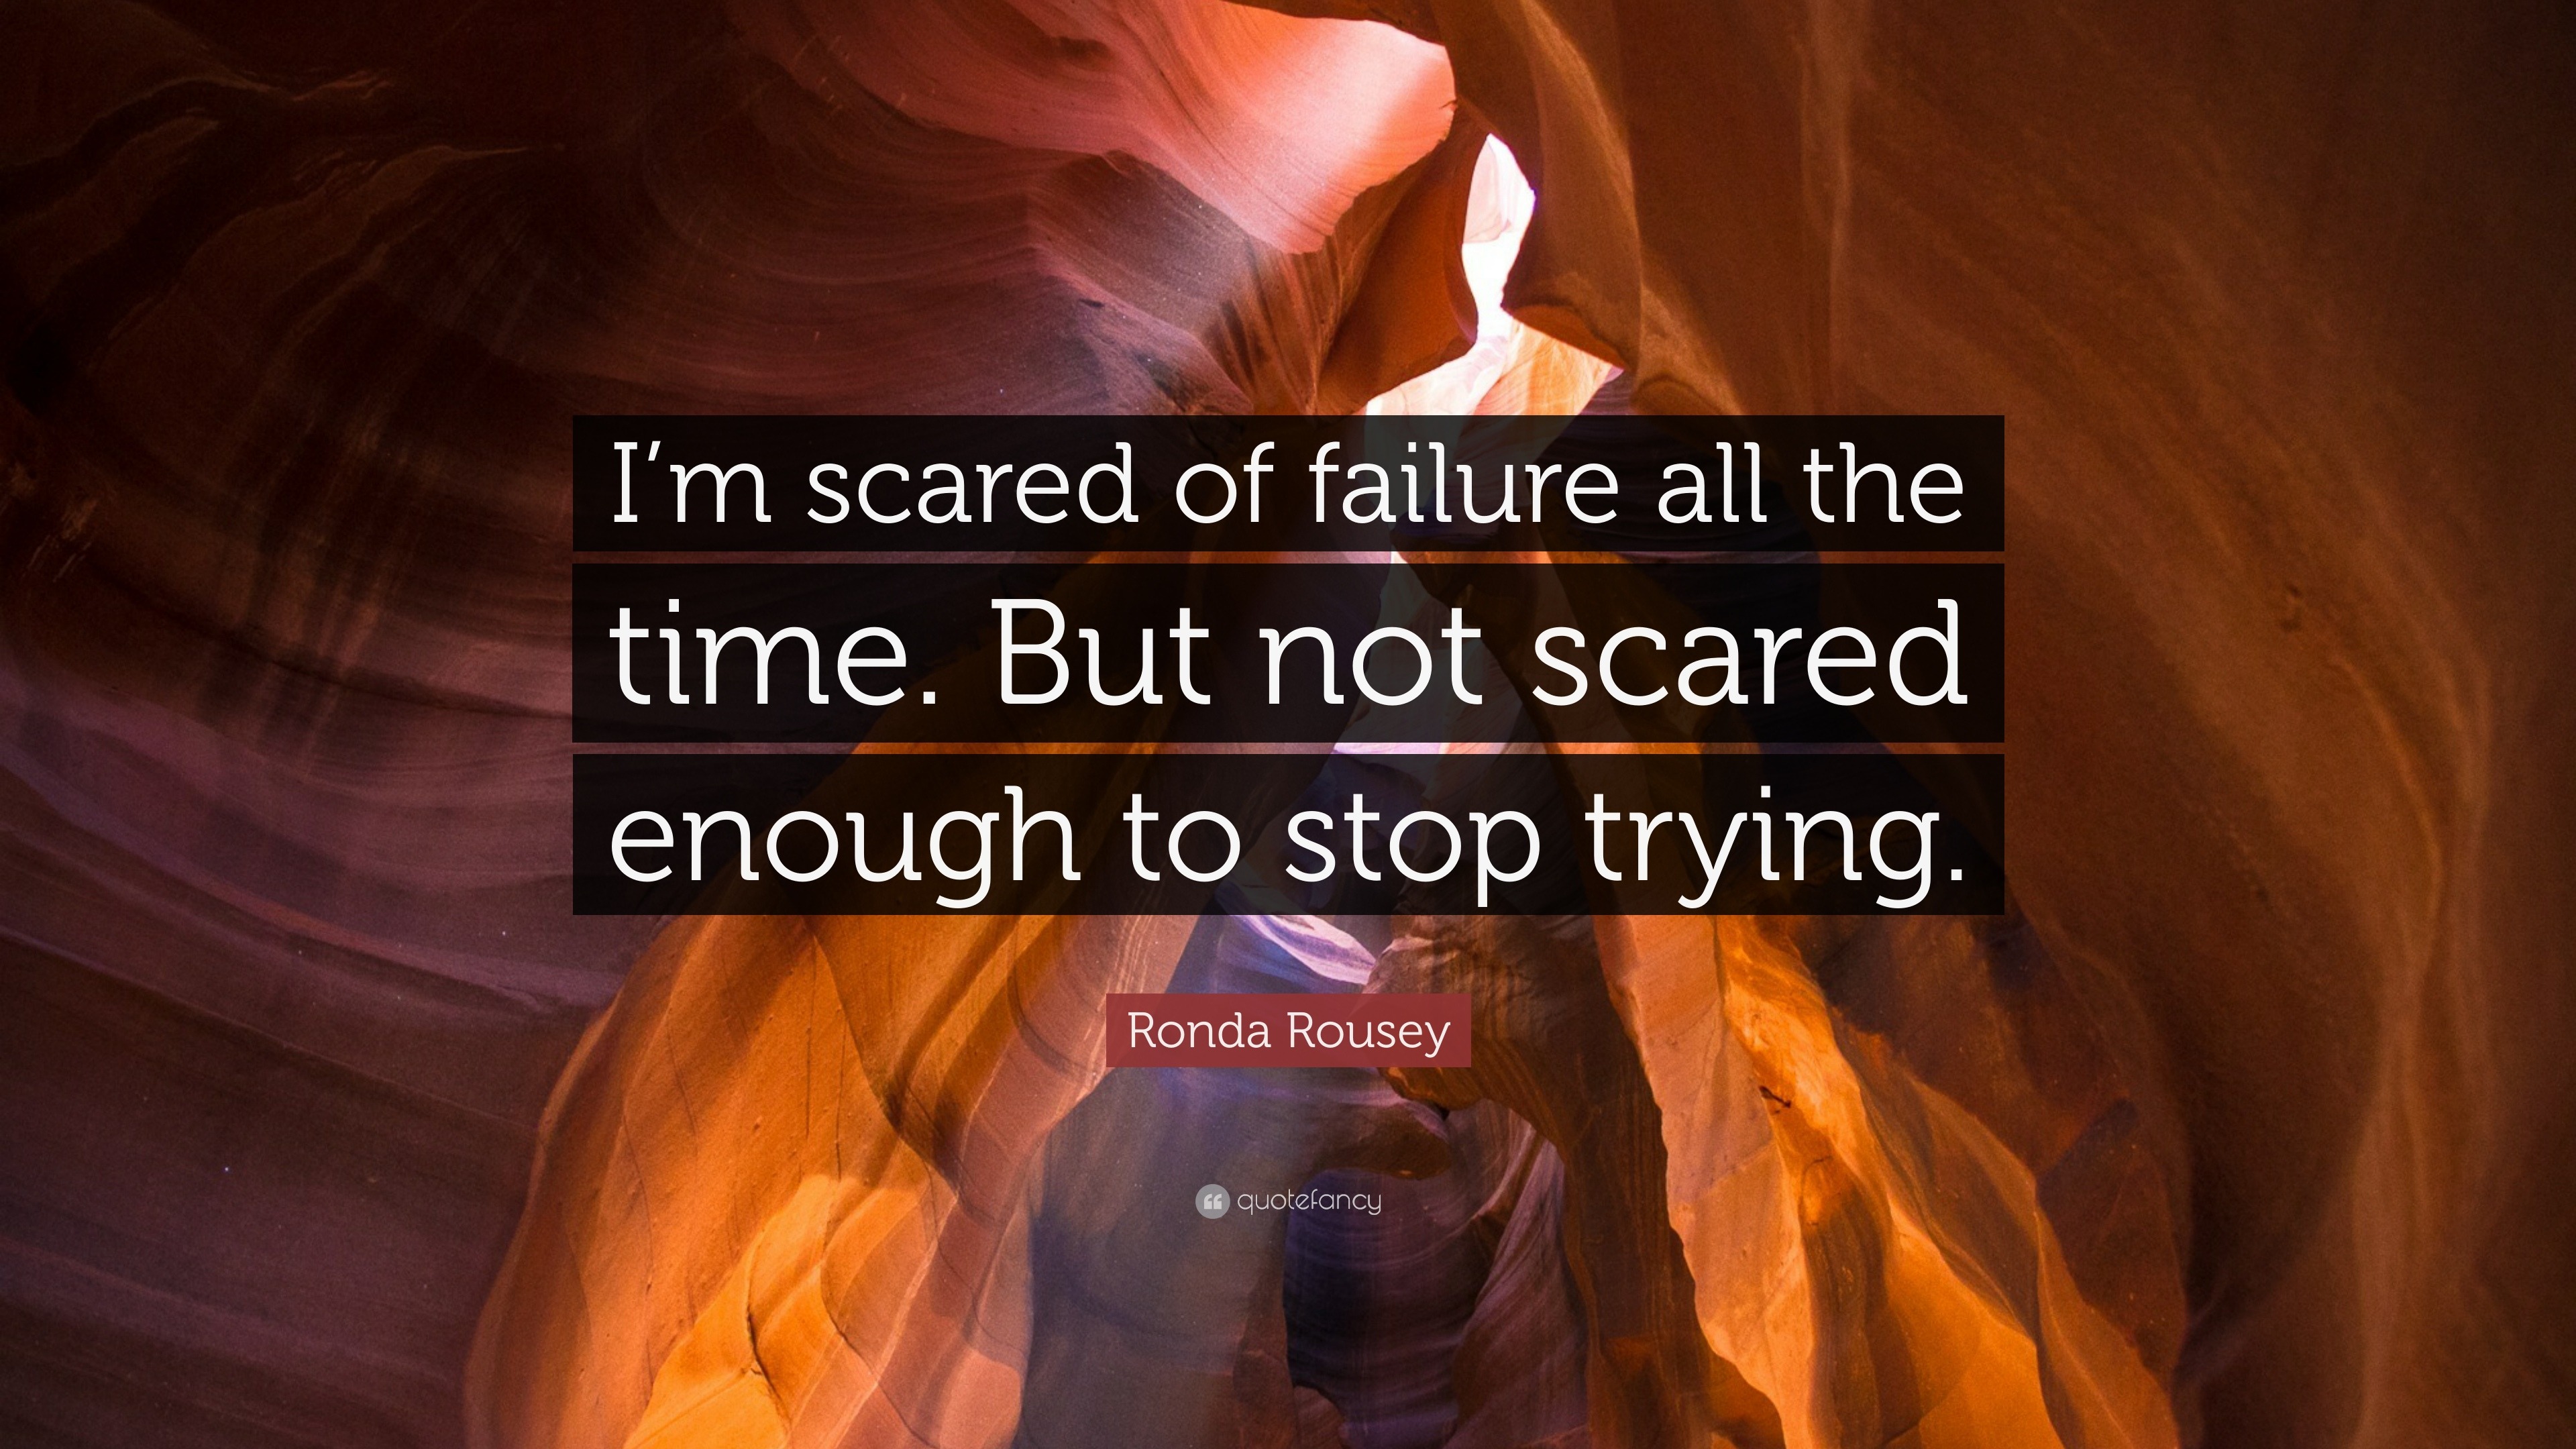 Ronda Rousey Quote: "I'm scared of failure all the time ...